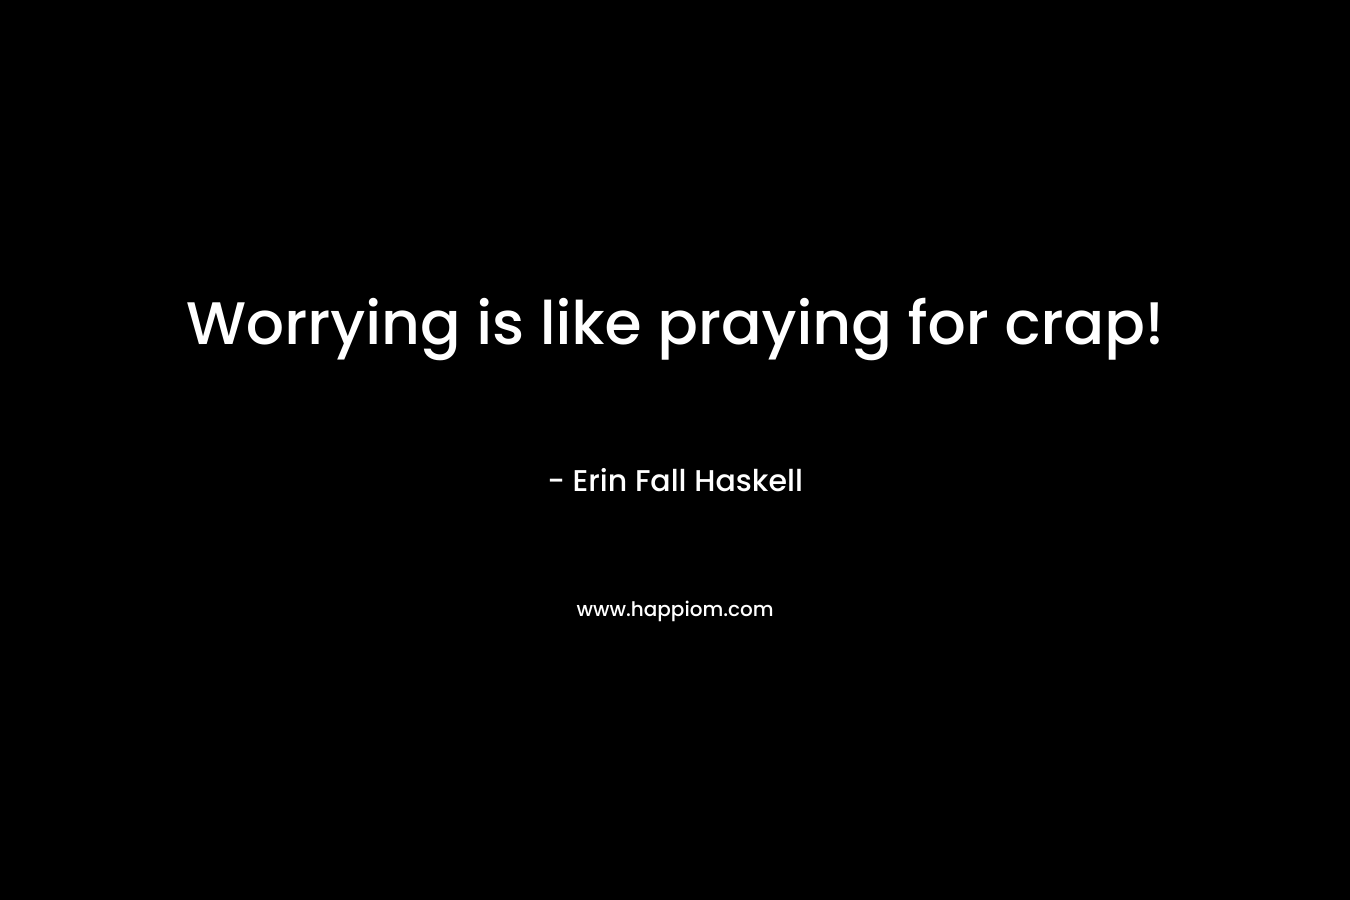 Worrying is like praying for crap! – Erin Fall Haskell